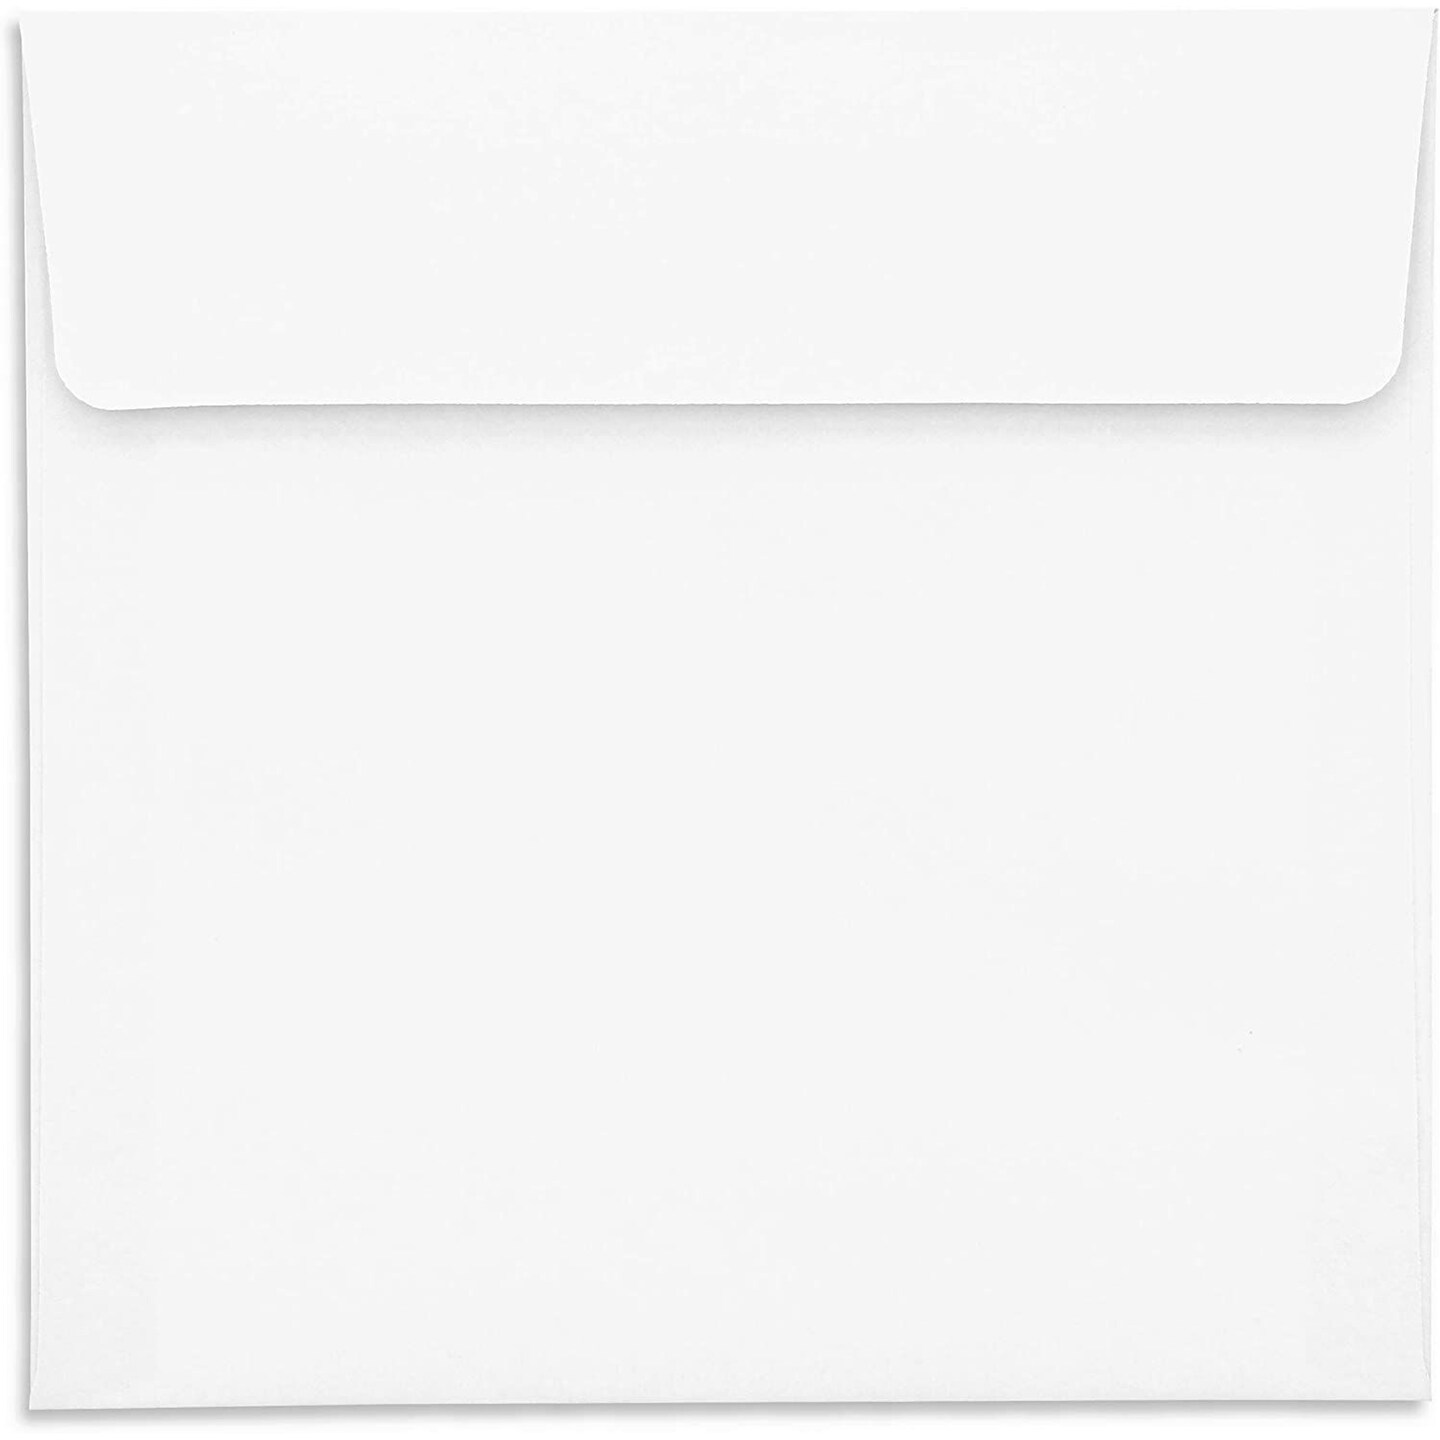 50 Pack Square Envelopes, 5.5 x 5.5, for Greeting Cards, Wedding Invitations, Self Adhesive Peel and Stick (White)